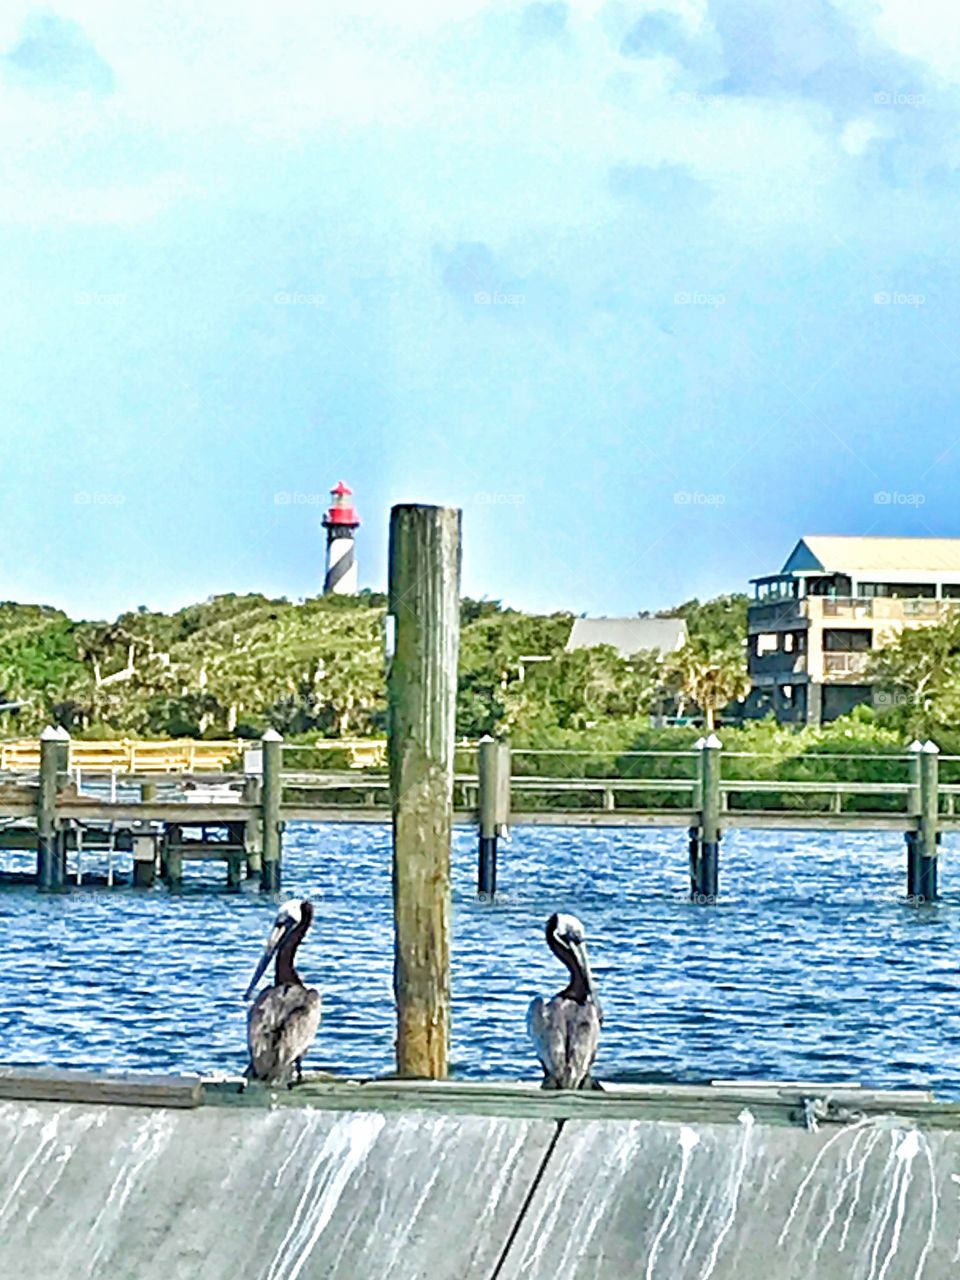 Pelicans on the lookout